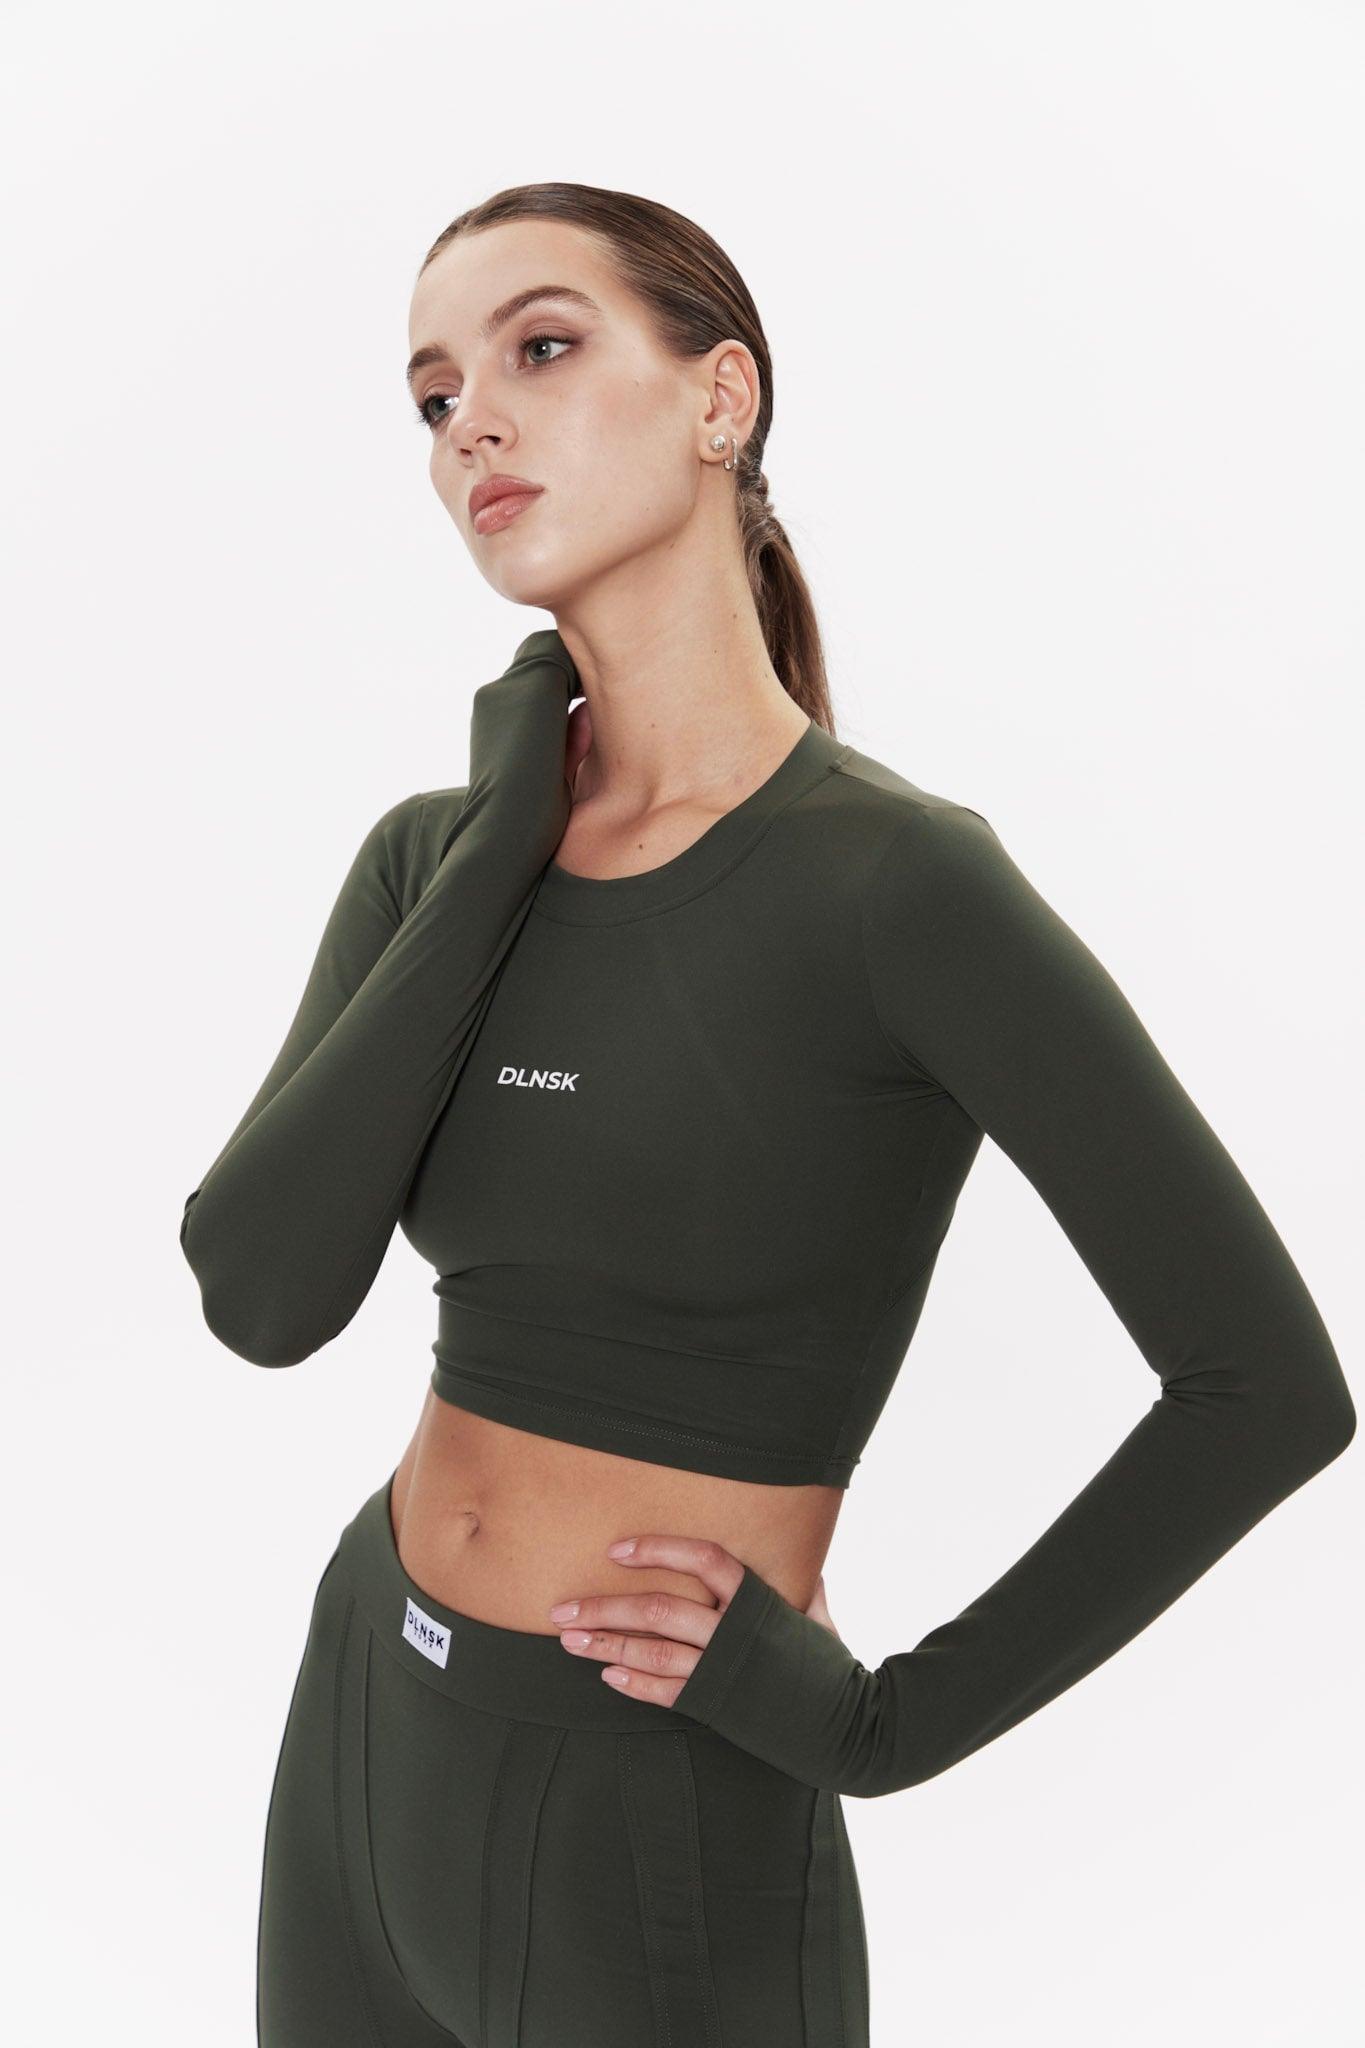 SHAPING crop top IN KHAKI DLNSK